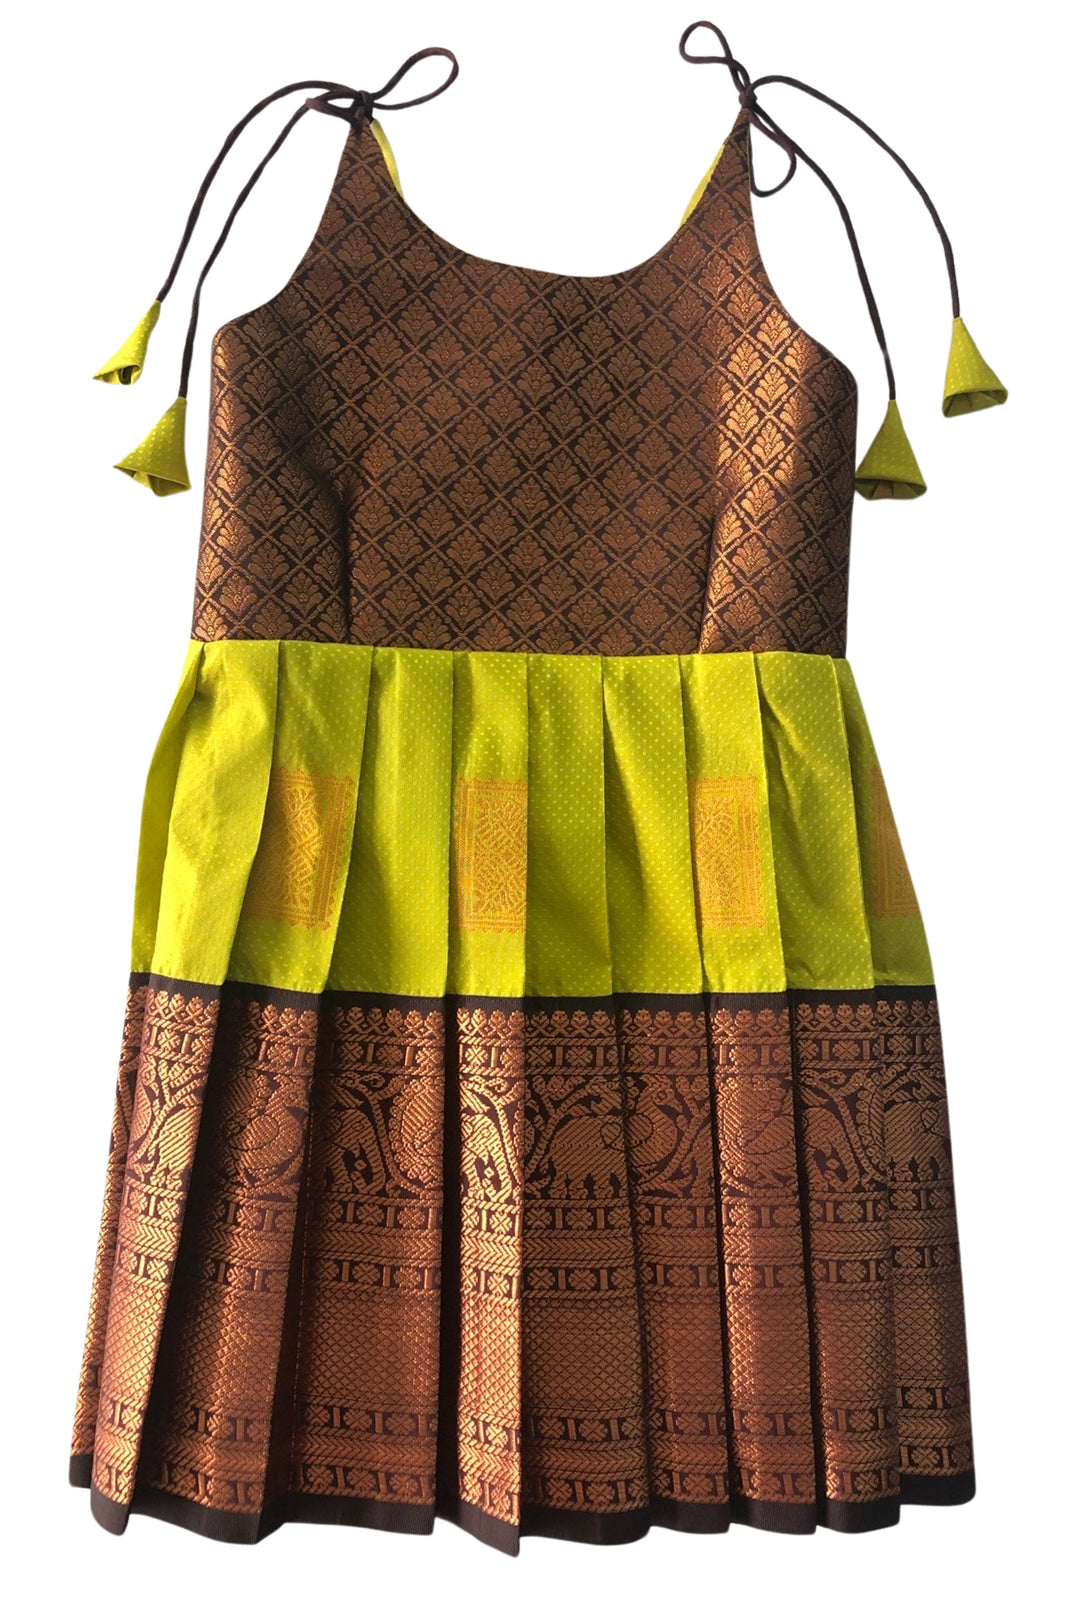 The Nesavu Tie Up Frock Luminous Chartreuse Silk Tie-Up Frock with Cocoa Print – Bold & Beautiful Festive Wear Nesavu 18 (2Y) / Green / Style 1 T320A-18 Chartreuse & Cocoa Silk Frock | Bold Festive Tie-Up Dress | The Nesavu